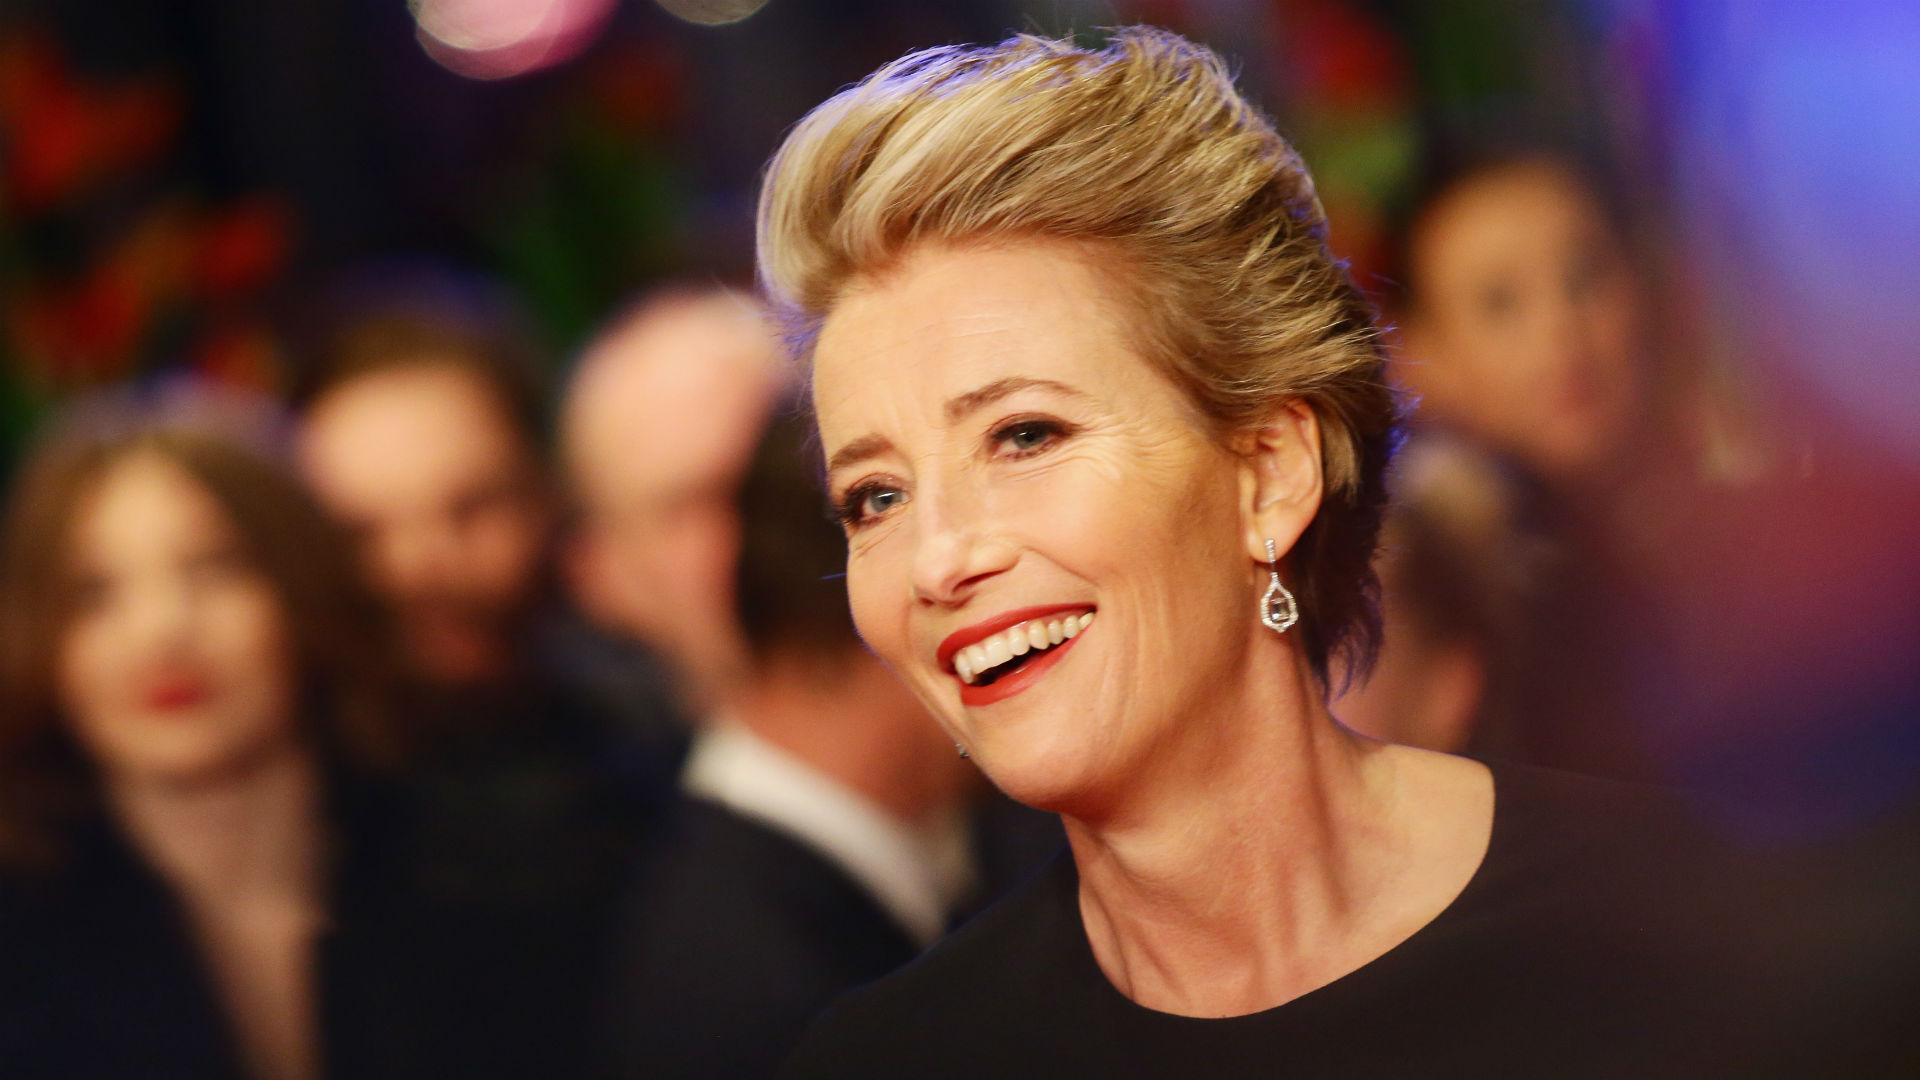 Dame Emma Thompson Calls Out Sexist Double Standards in Intimate Scenes